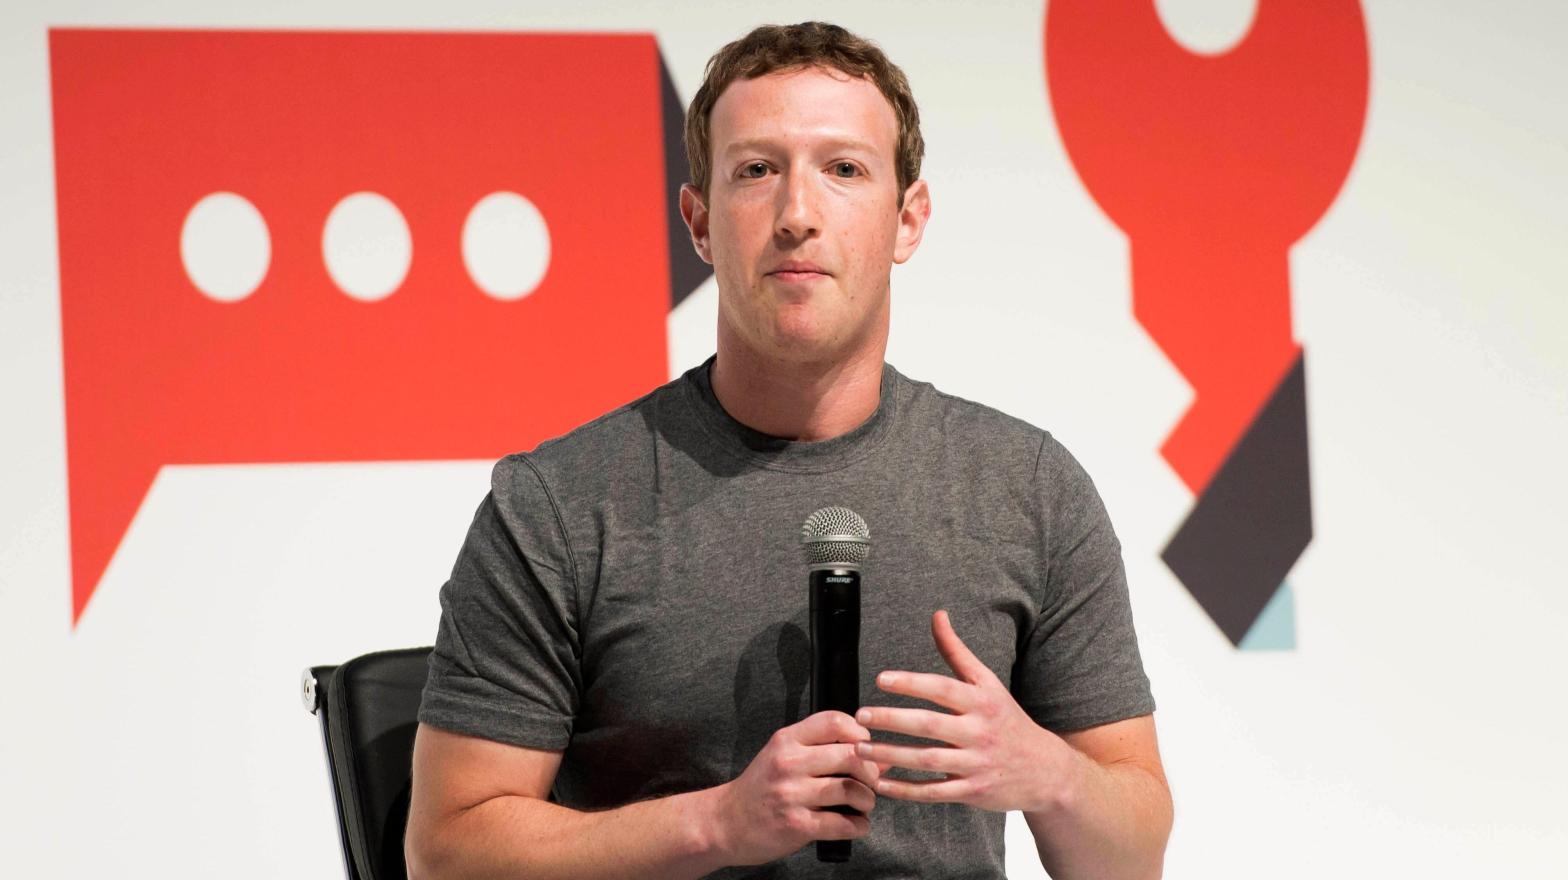 Zuckerberg is in the hot seat after Meta has seen stock prices plunge by 26% in one day.  (Photo: zz/DJ/AAD/STAR MAX/IPx, AP)